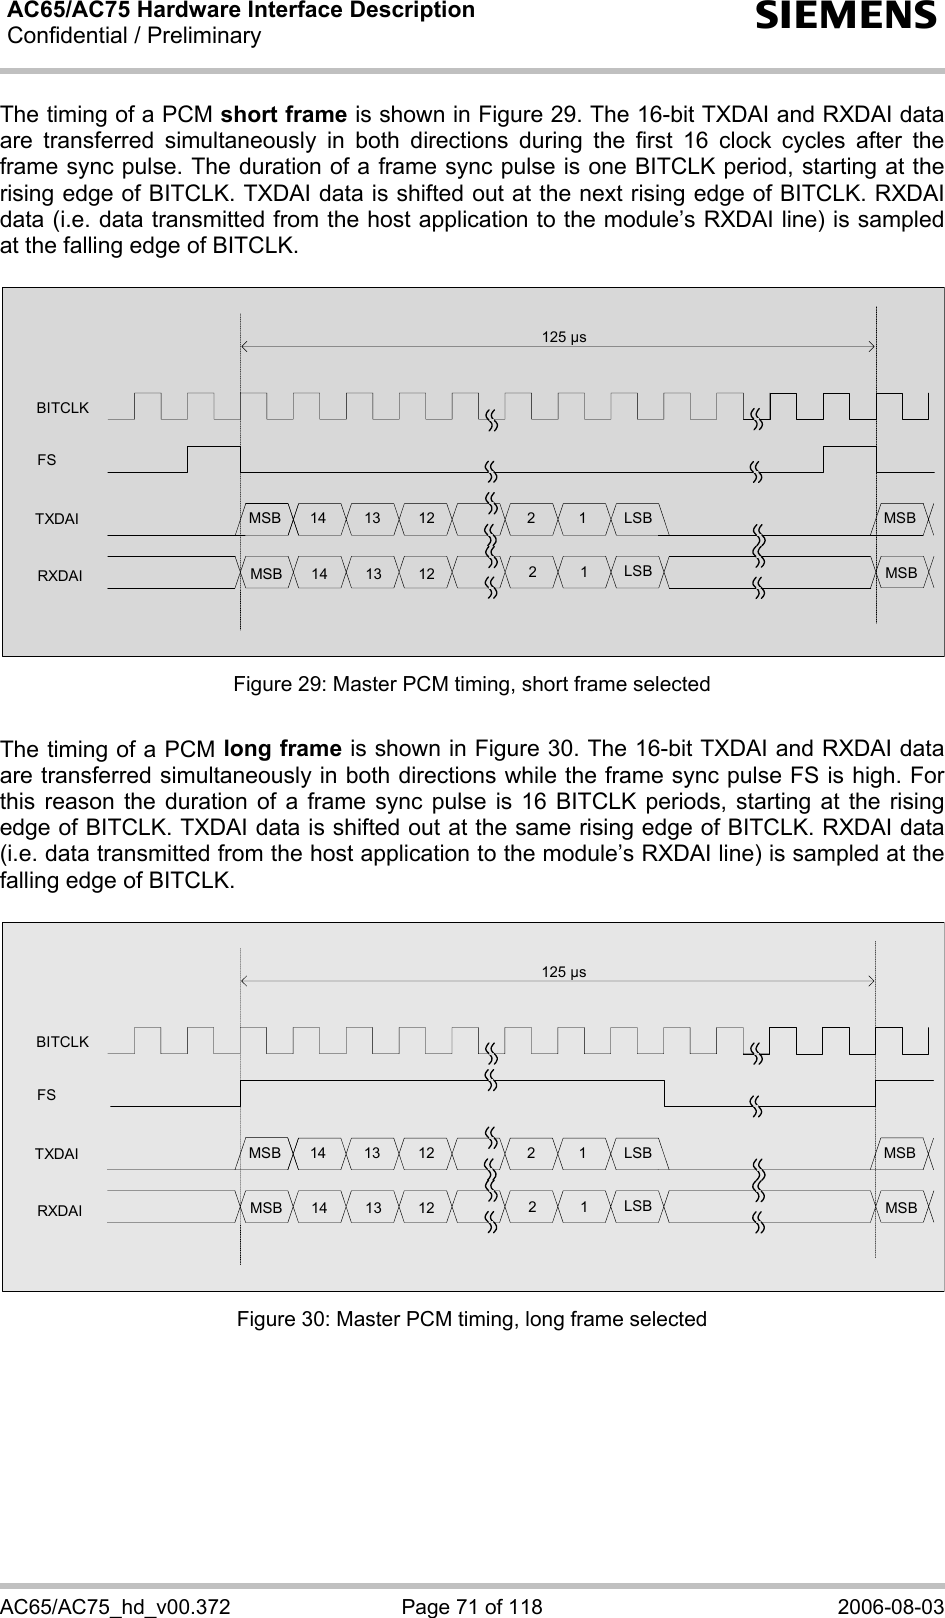 AC65/AC75 Hardware Interface Description Confidential / Preliminary   s AC65/AC75_hd_v00.372  Page 71 of 118  2006-08-03 The timing of a PCM short frame is shown in Figure 29. The 16-bit TXDAI and RXDAI data are transferred simultaneously in both directions during the first 16 clock cycles after the frame sync pulse. The duration of a frame sync pulse is one BITCLK period, starting at the rising edge of BITCLK. TXDAI data is shifted out at the next rising edge of BITCLK. RXDAI data (i.e. data transmitted from the host application to the module’s RXDAI line) is sampled at the falling edge of BITCLK.   BITCLKTXDAIRXDAIFSMSBMSBLSBLSB14 1314 1311121222MSBMSB125 µs Figure 29: Master PCM timing, short frame selected  The timing of a PCM long frame is shown in Figure 30. The 16-bit TXDAI and RXDAI data are transferred simultaneously in both directions while the frame sync pulse FS is high. For this reason the duration of a frame sync pulse is 16 BITCLK periods, starting at the rising edge of BITCLK. TXDAI data is shifted out at the same rising edge of BITCLK. RXDAI data (i.e. data transmitted from the host application to the module’s RXDAI line) is sampled at the falling edge of BITCLK.  BITCLKTXDAIRXDAIFSMSBMSBLSBLSB14 1314 1311121222MSBMSB125 µs Figure 30: Master PCM timing, long frame selected  